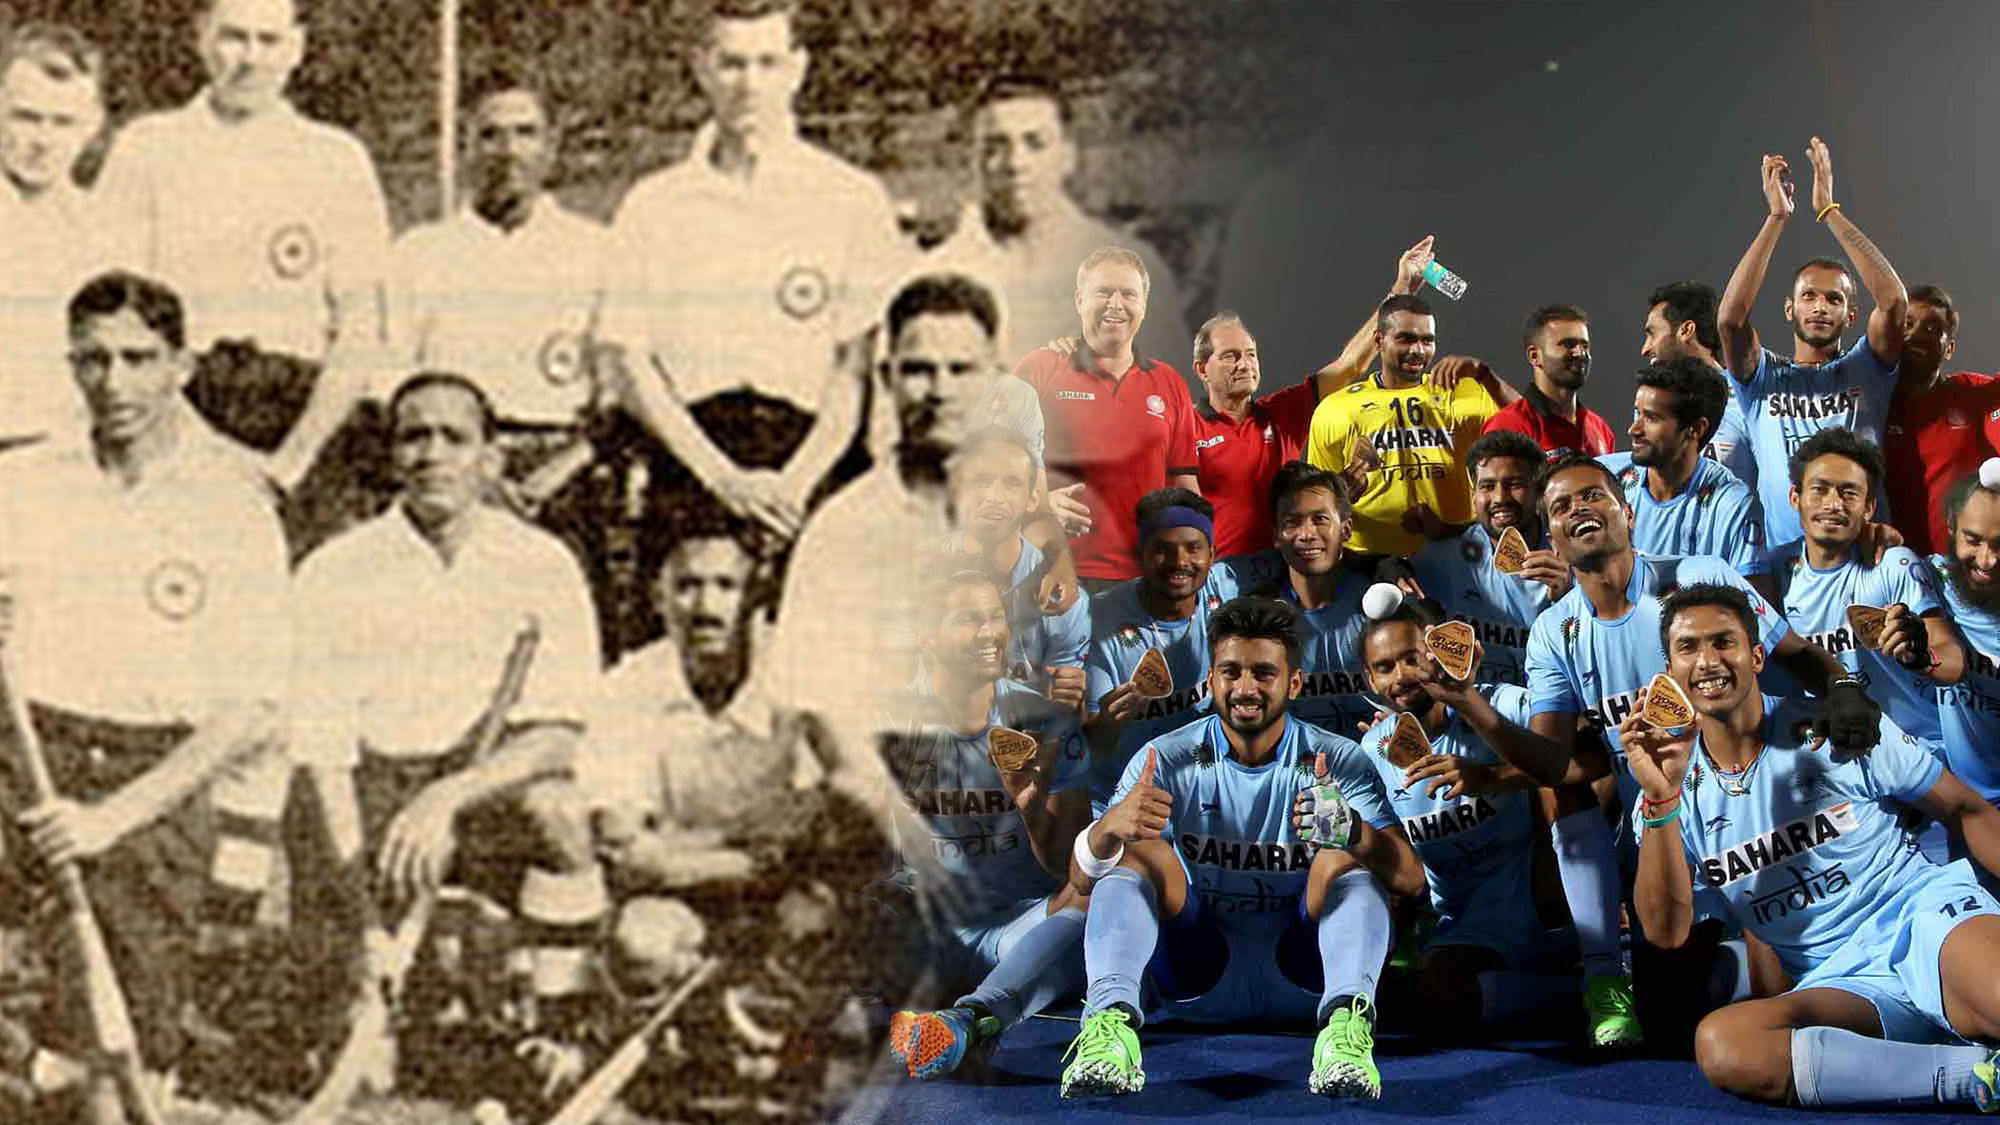 The Indian Hockey Team at the 1928 Olympics (left) and the current squad. (Photo: altered by <b>The Quint</b>)